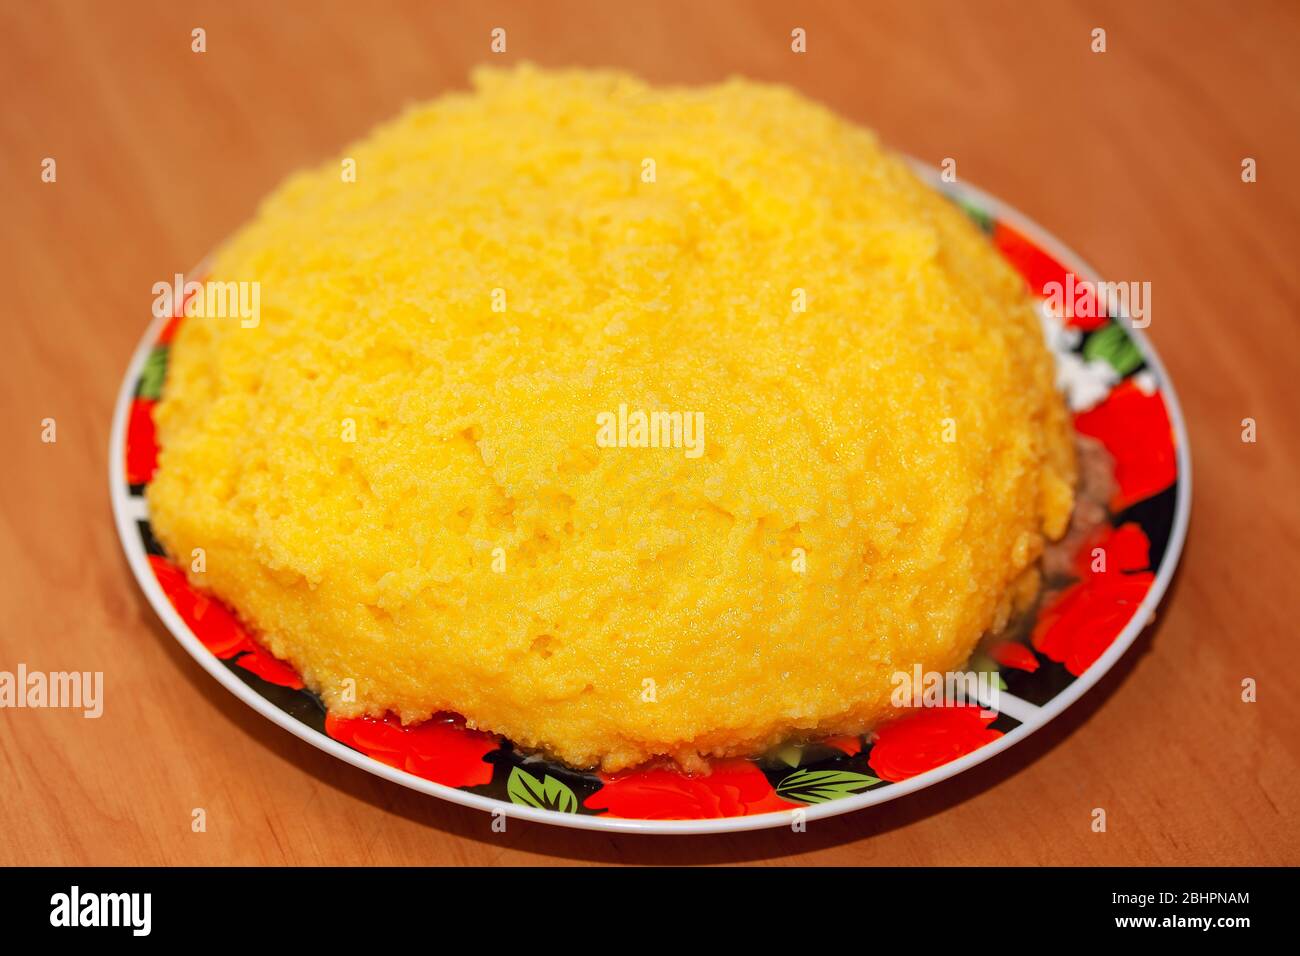 polenta traditional corn food in the plate Stock Photo